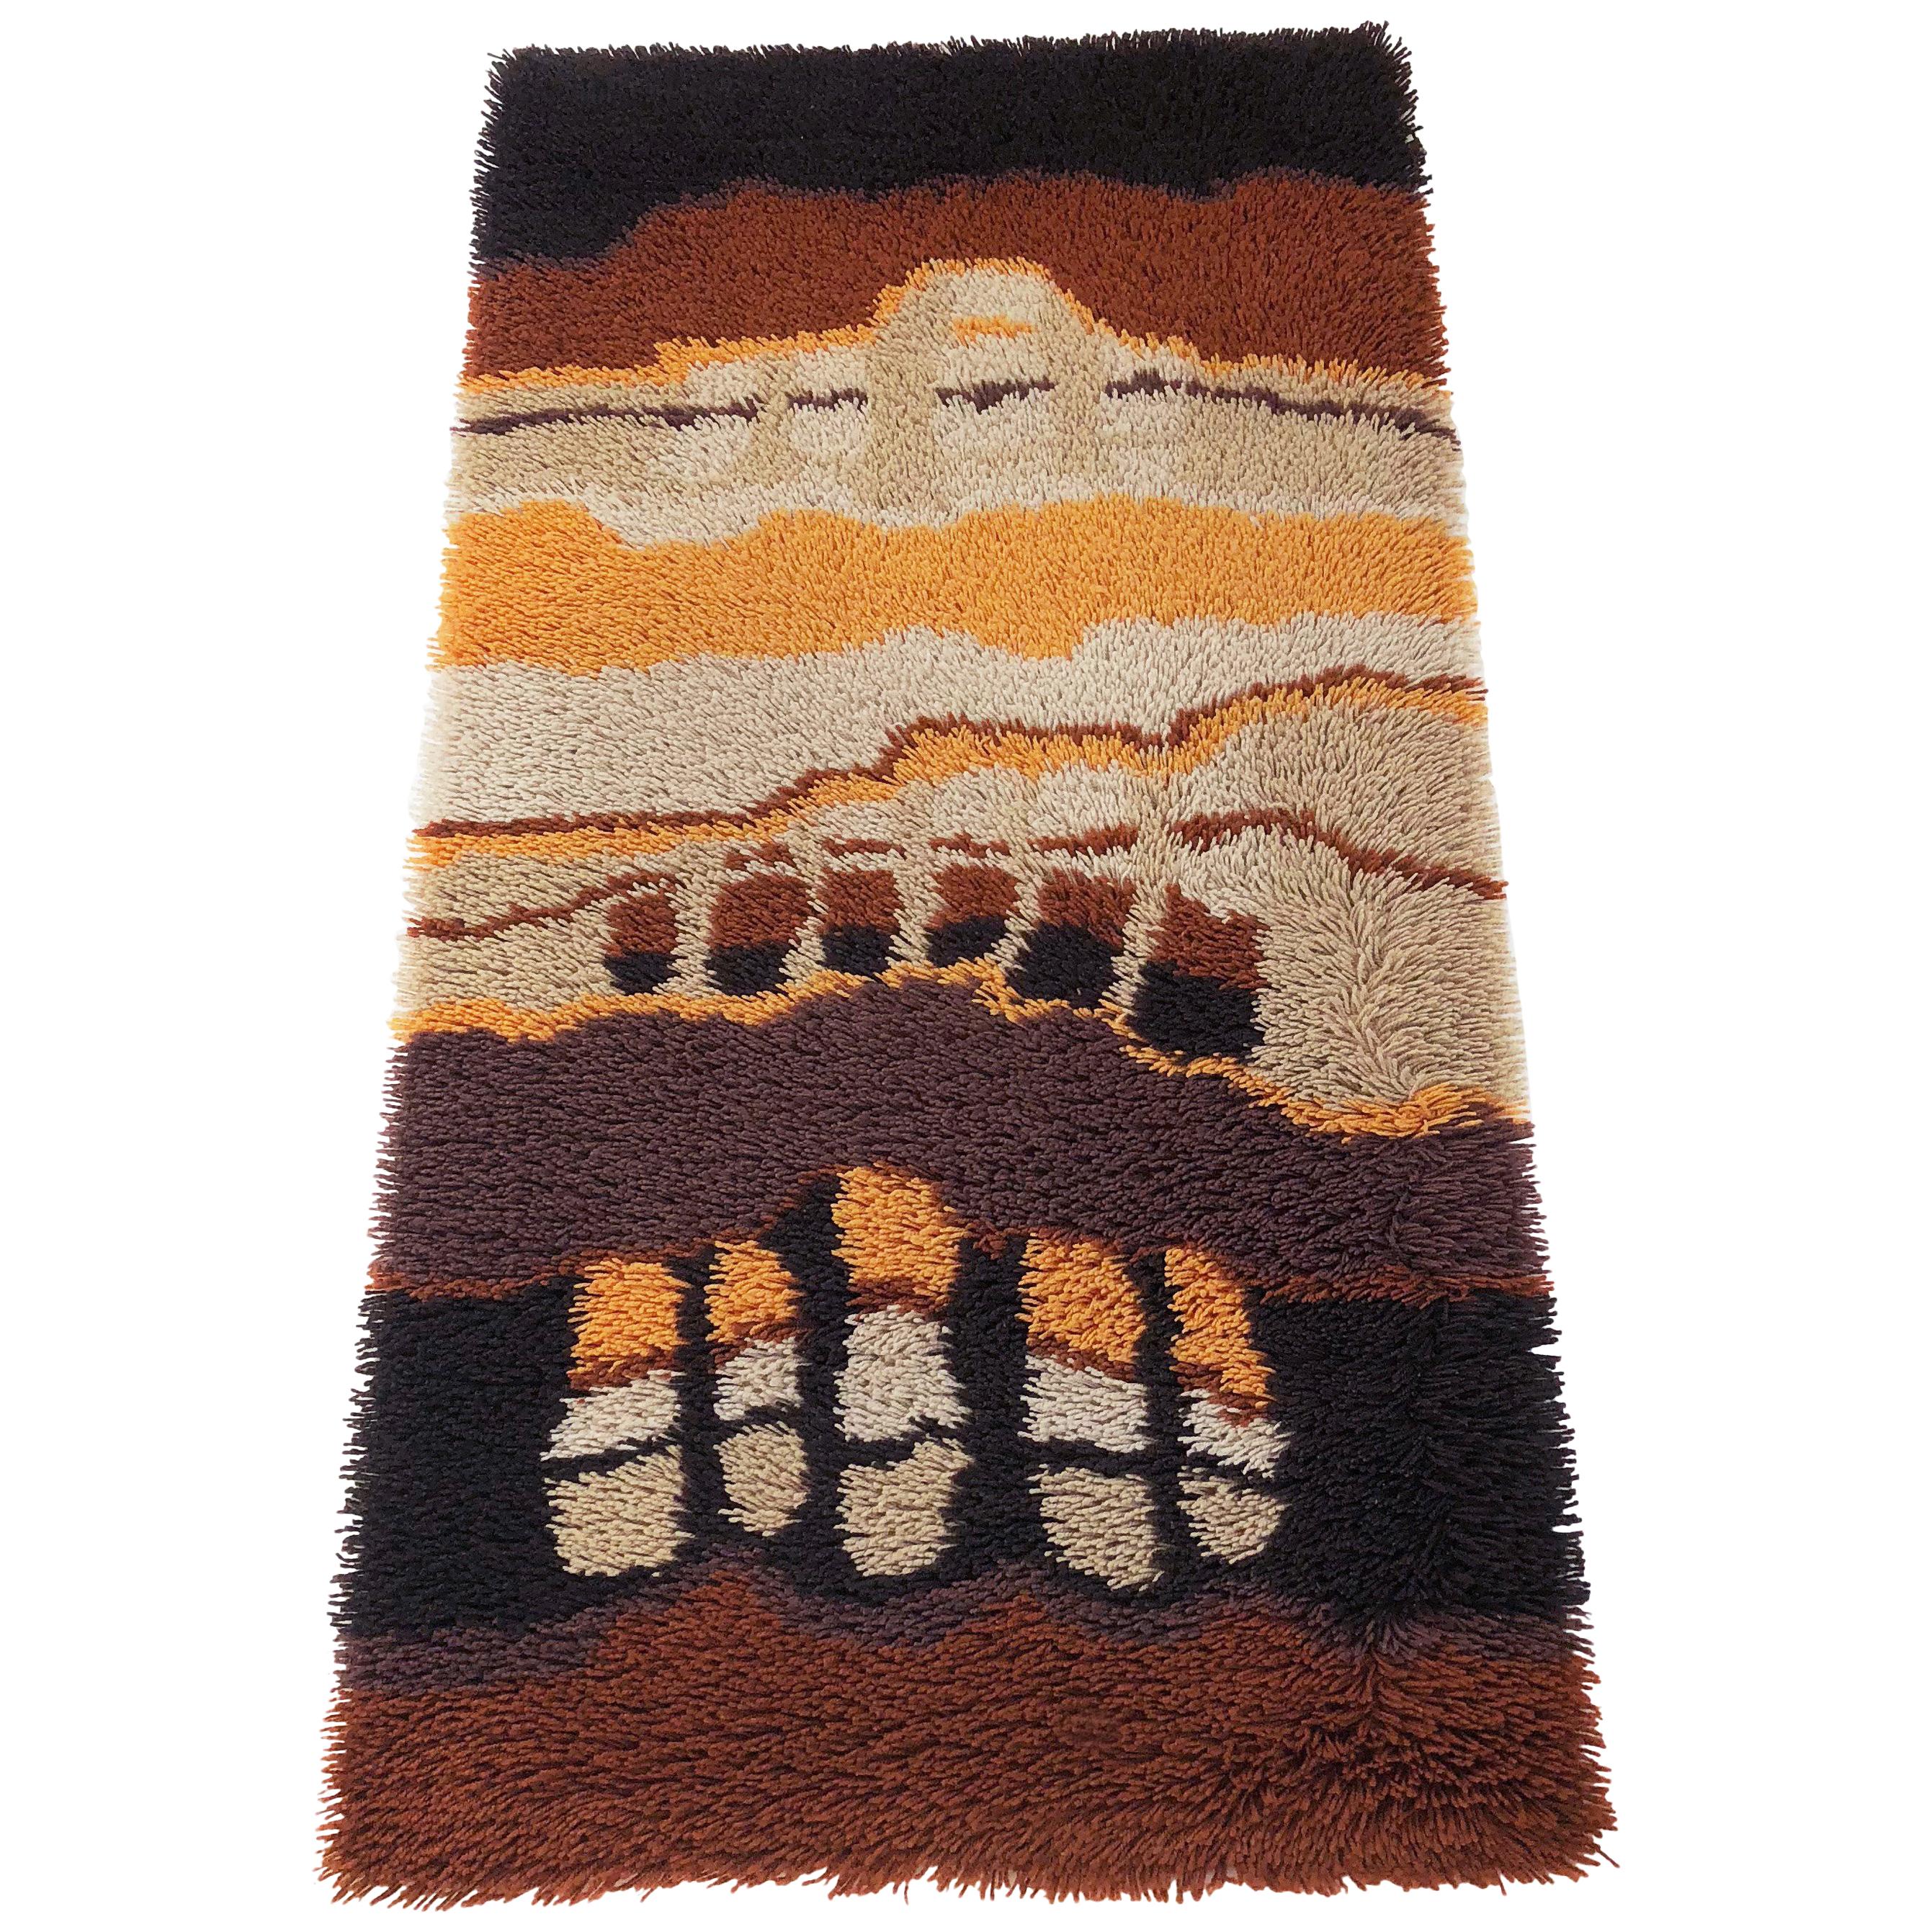 Small 1970s Modernist Multi-Color High Pile Rya Rug by Desso, Netherlands No. 2